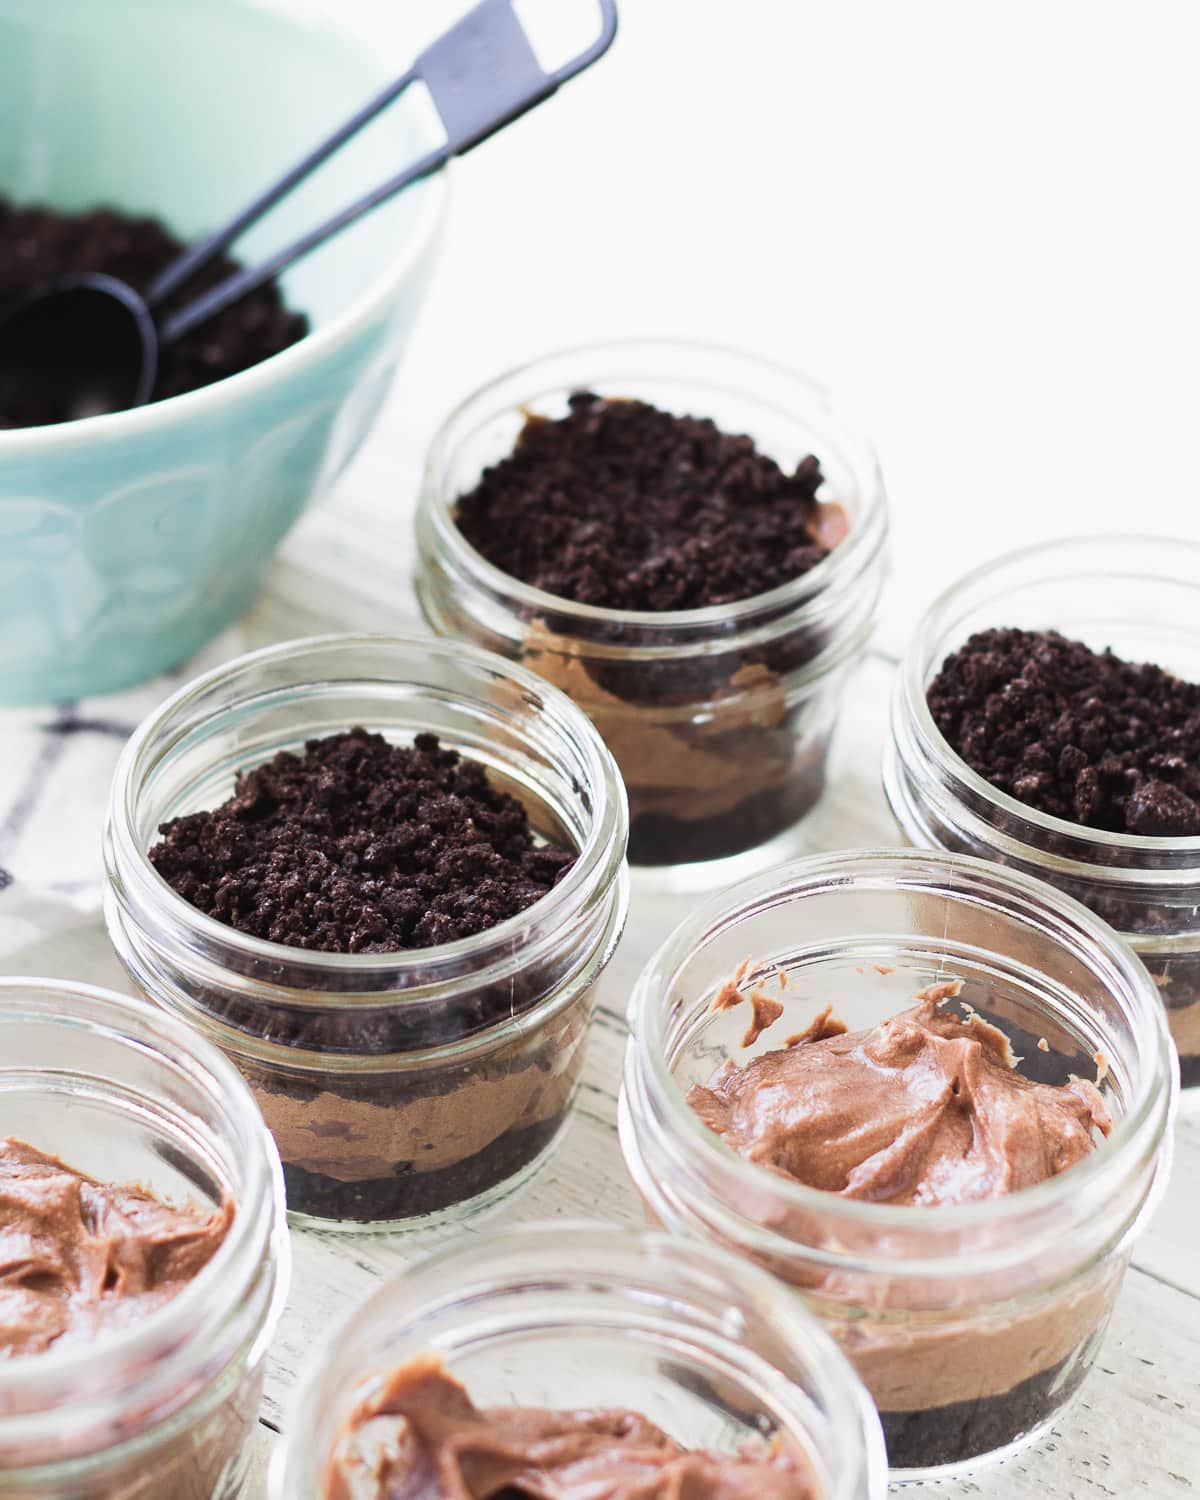 Layering oreo cookie crumbs and chocolate filling into dessert jars.